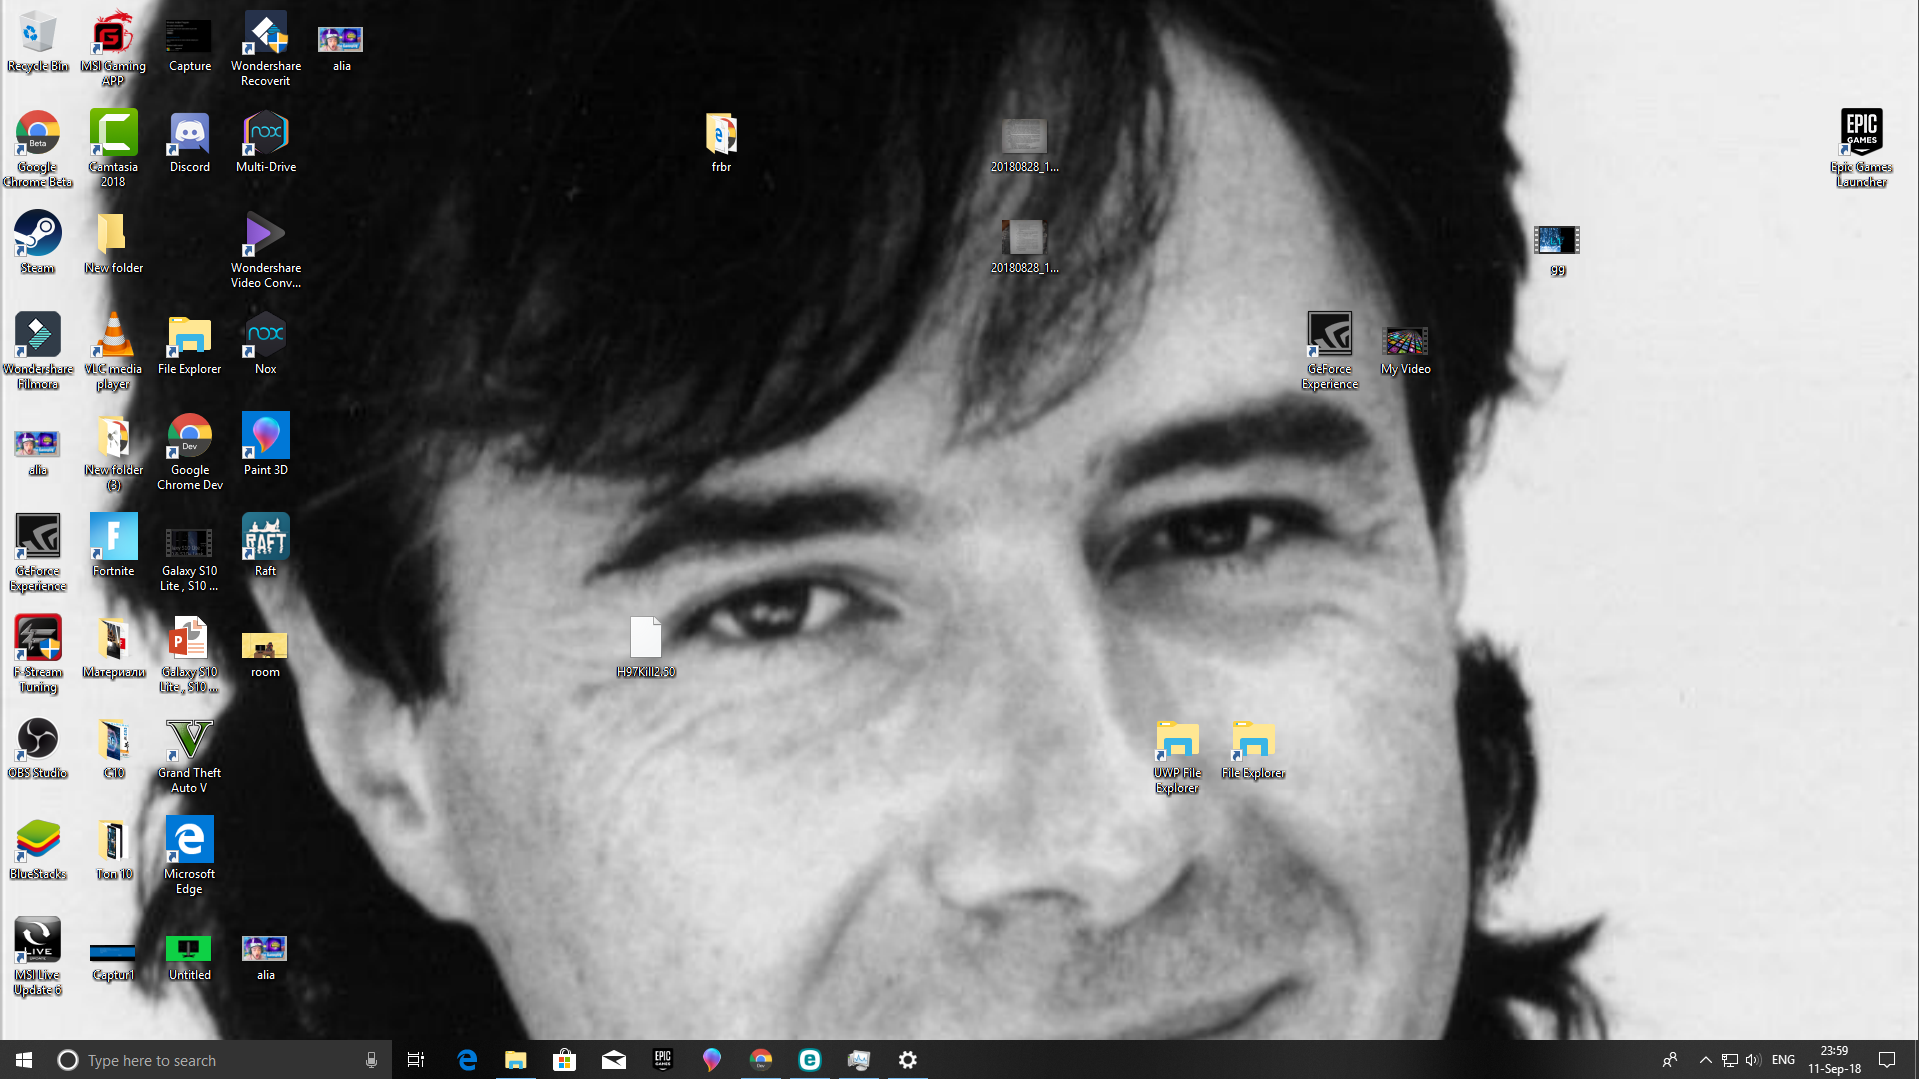 People I am scared! My wallpaper changed while I was use the - Microsoft  Community